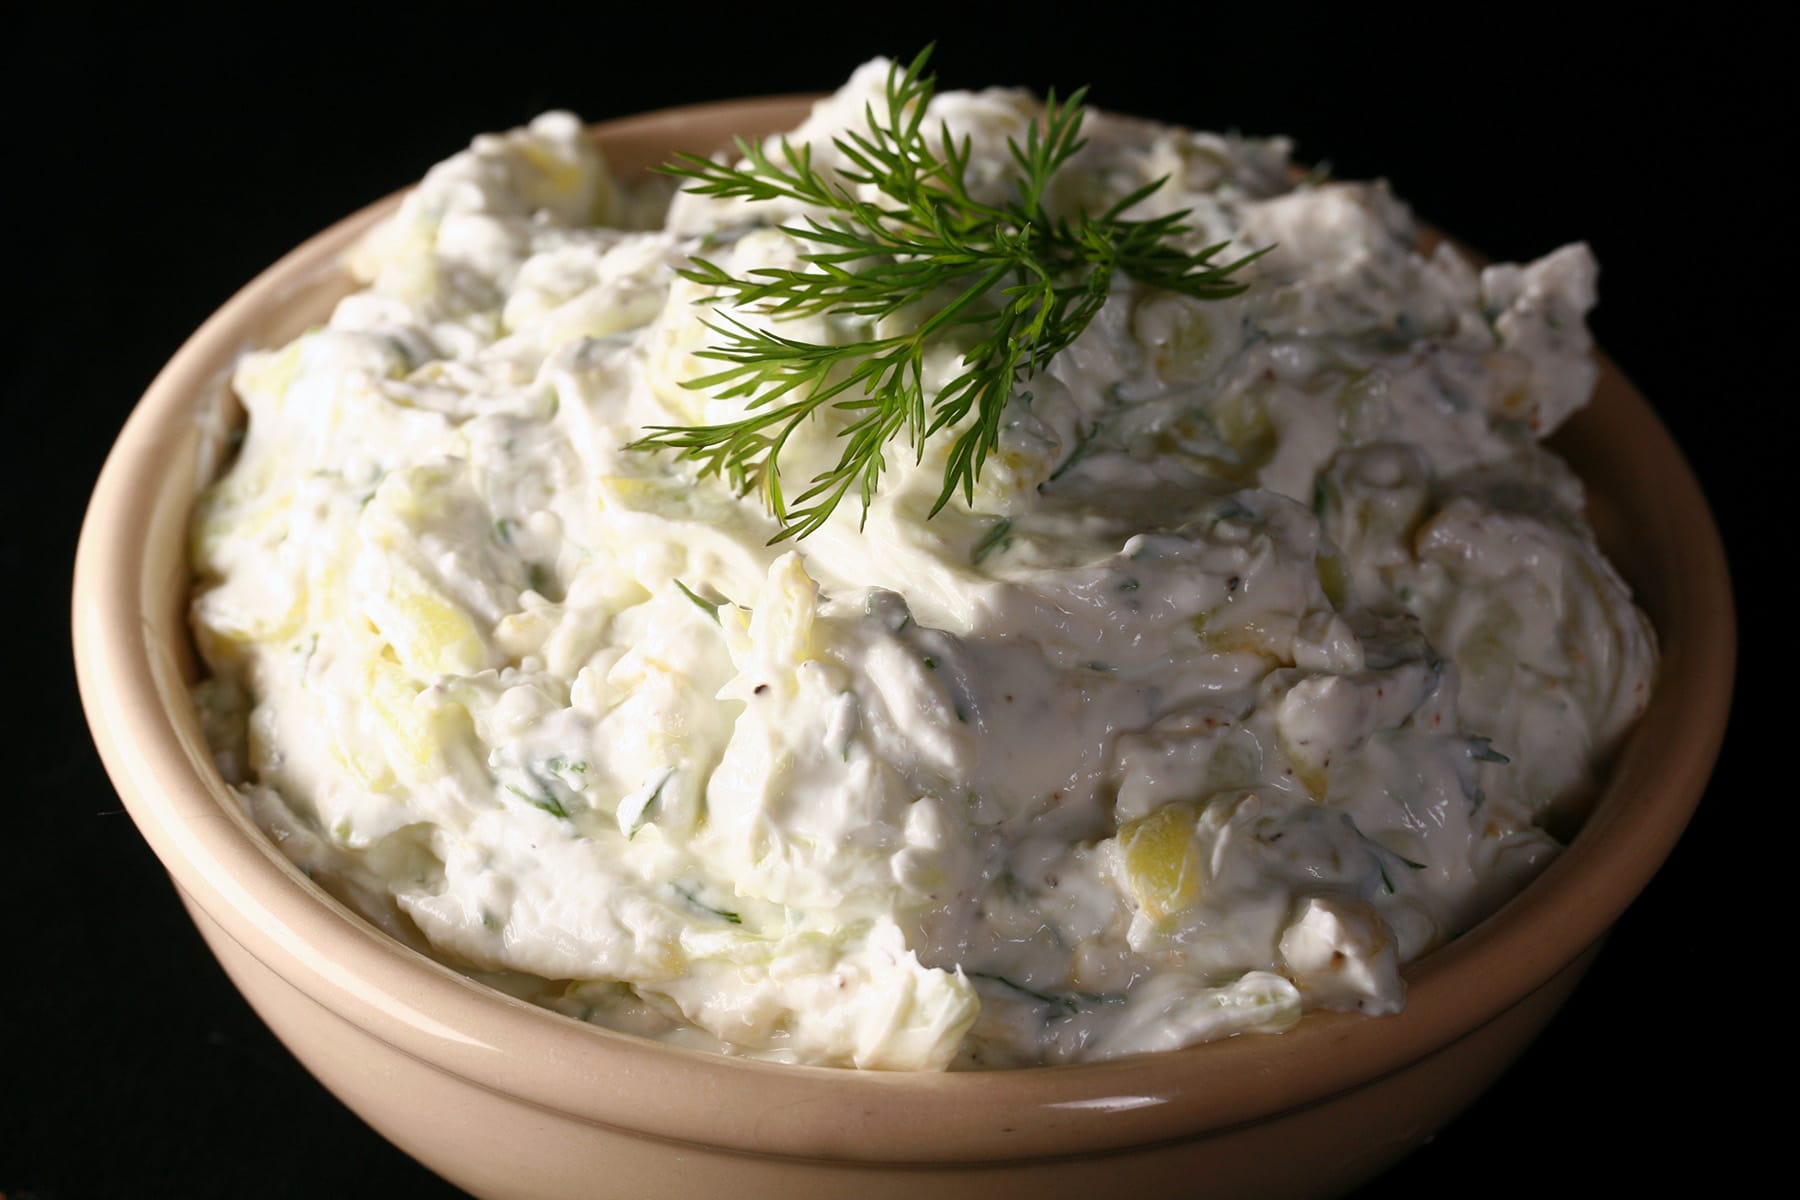 A bowl of thick tzatziki dip, garnished with fresh dill.